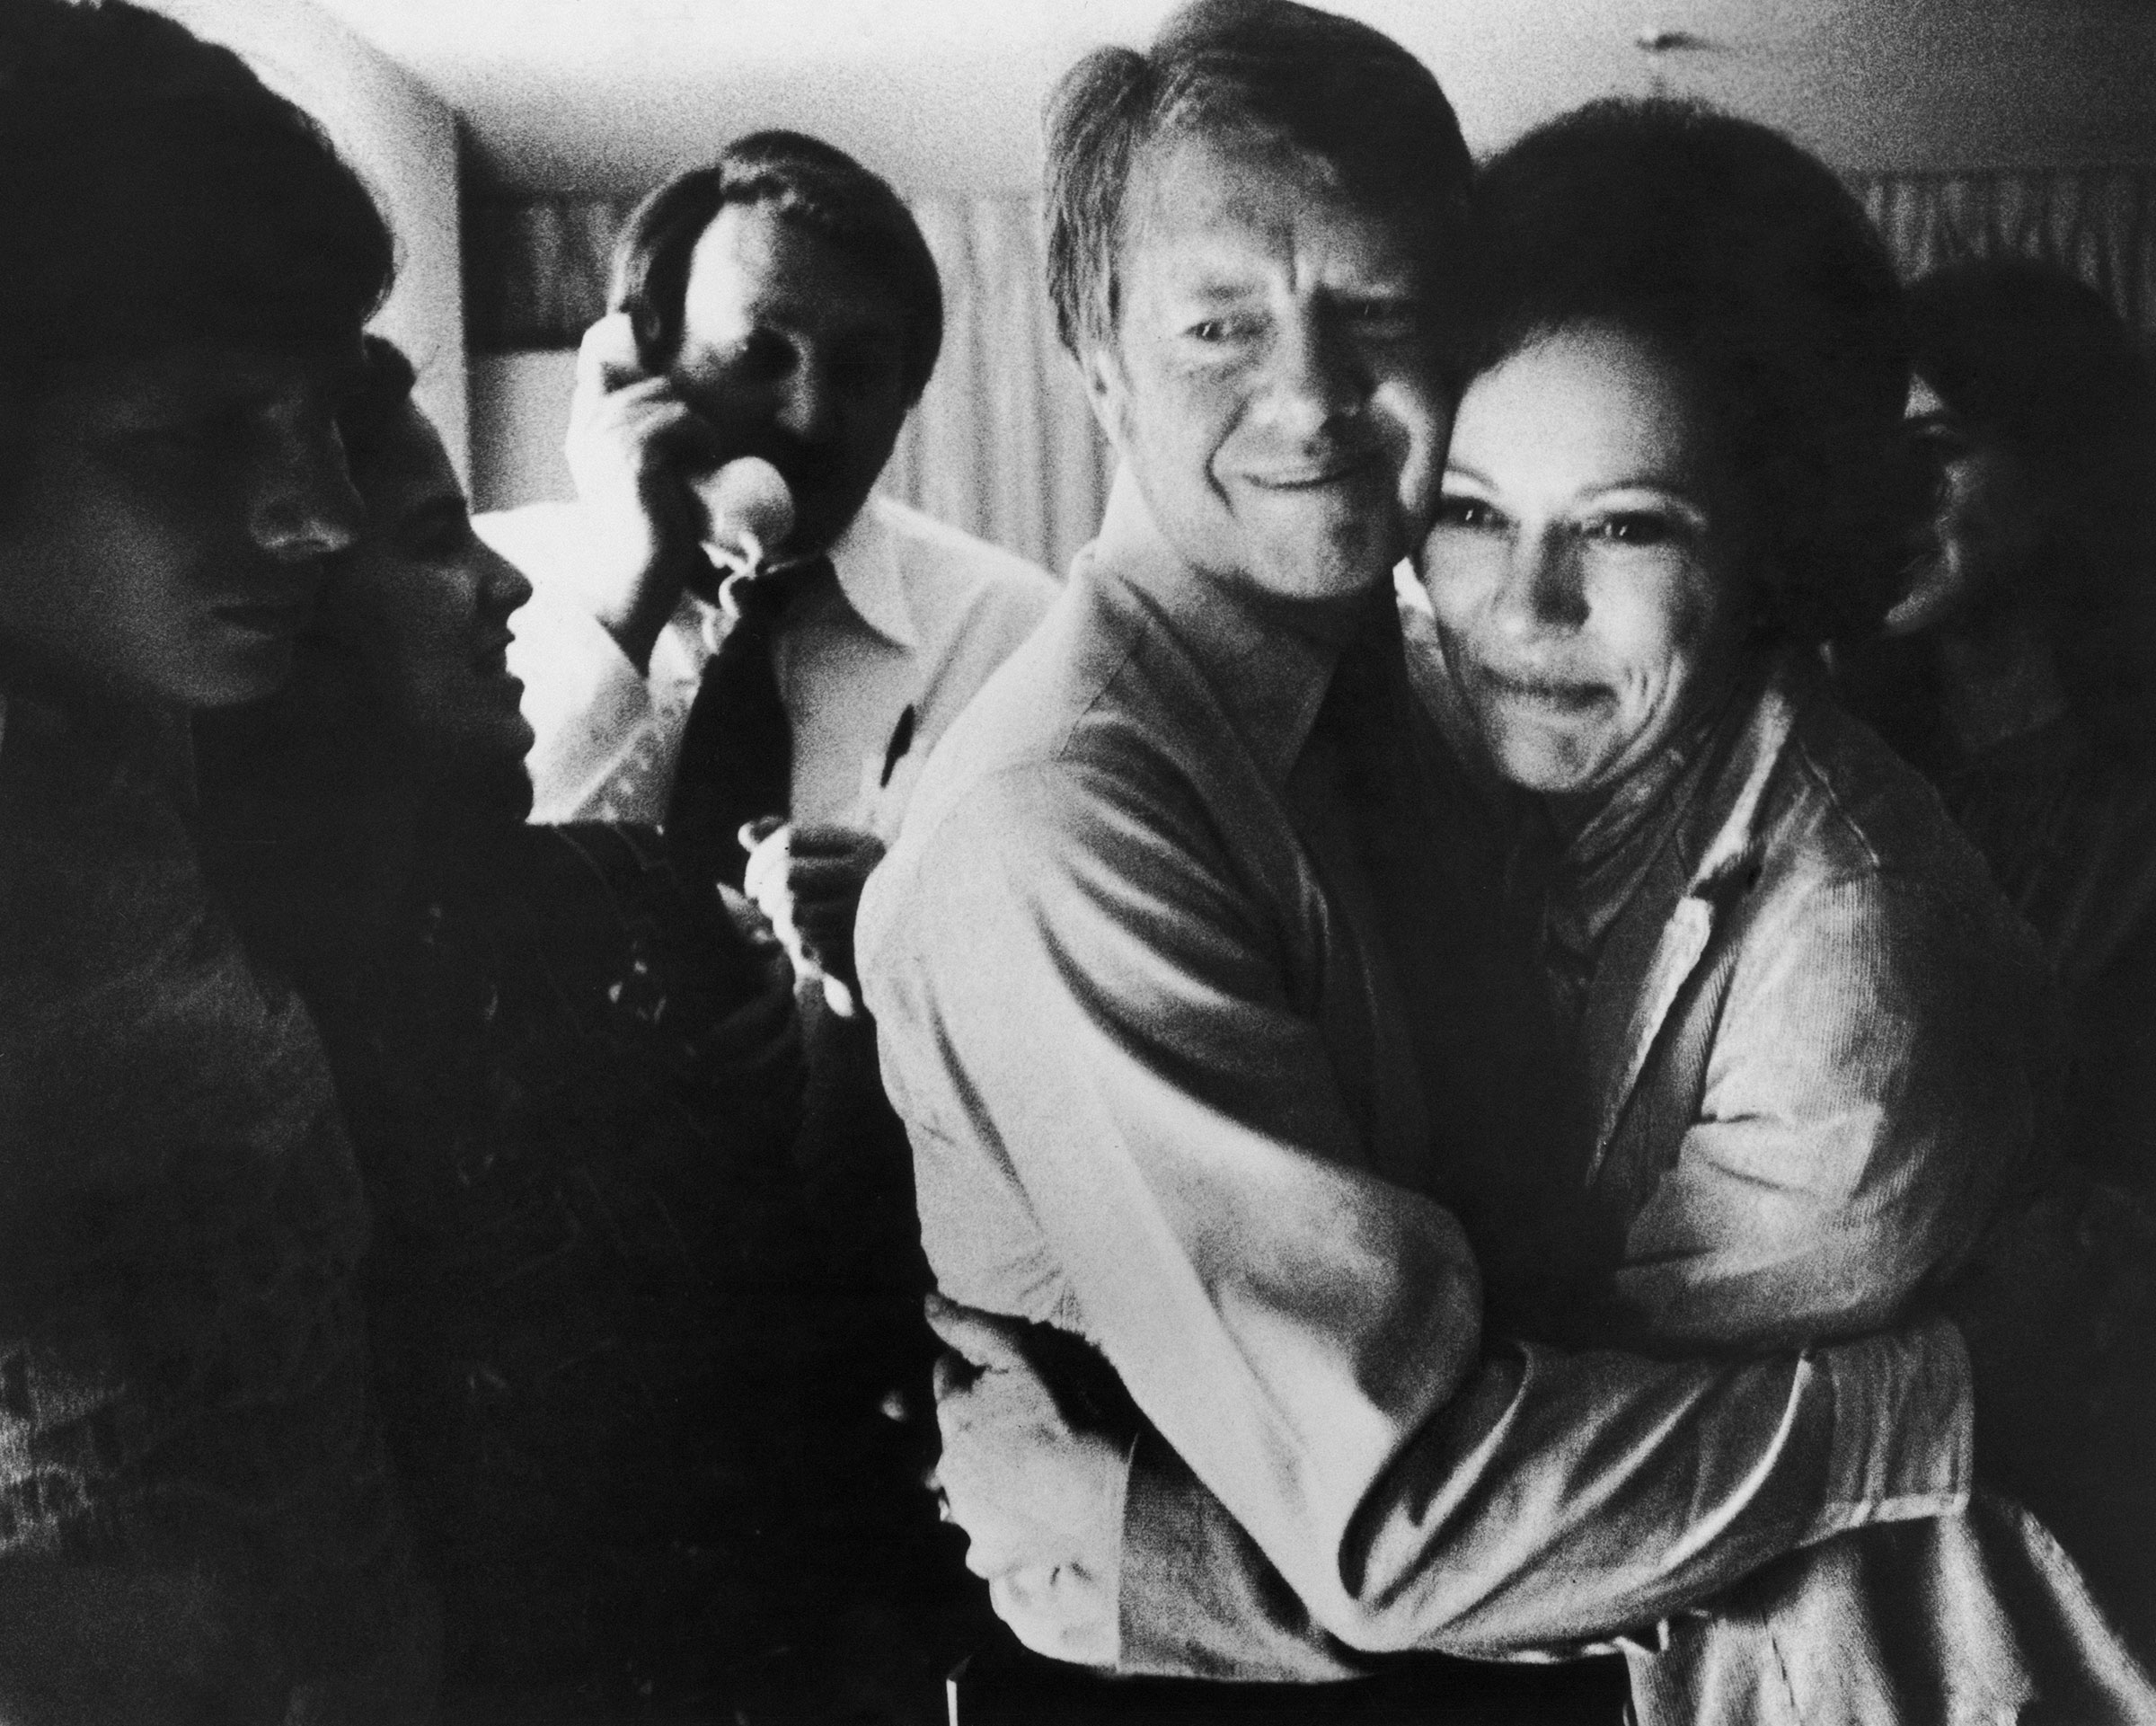 Jimmy Carter embraces Rosalynn after receiving the final news of his victory in the national general election, on Nov. 2, 1976.